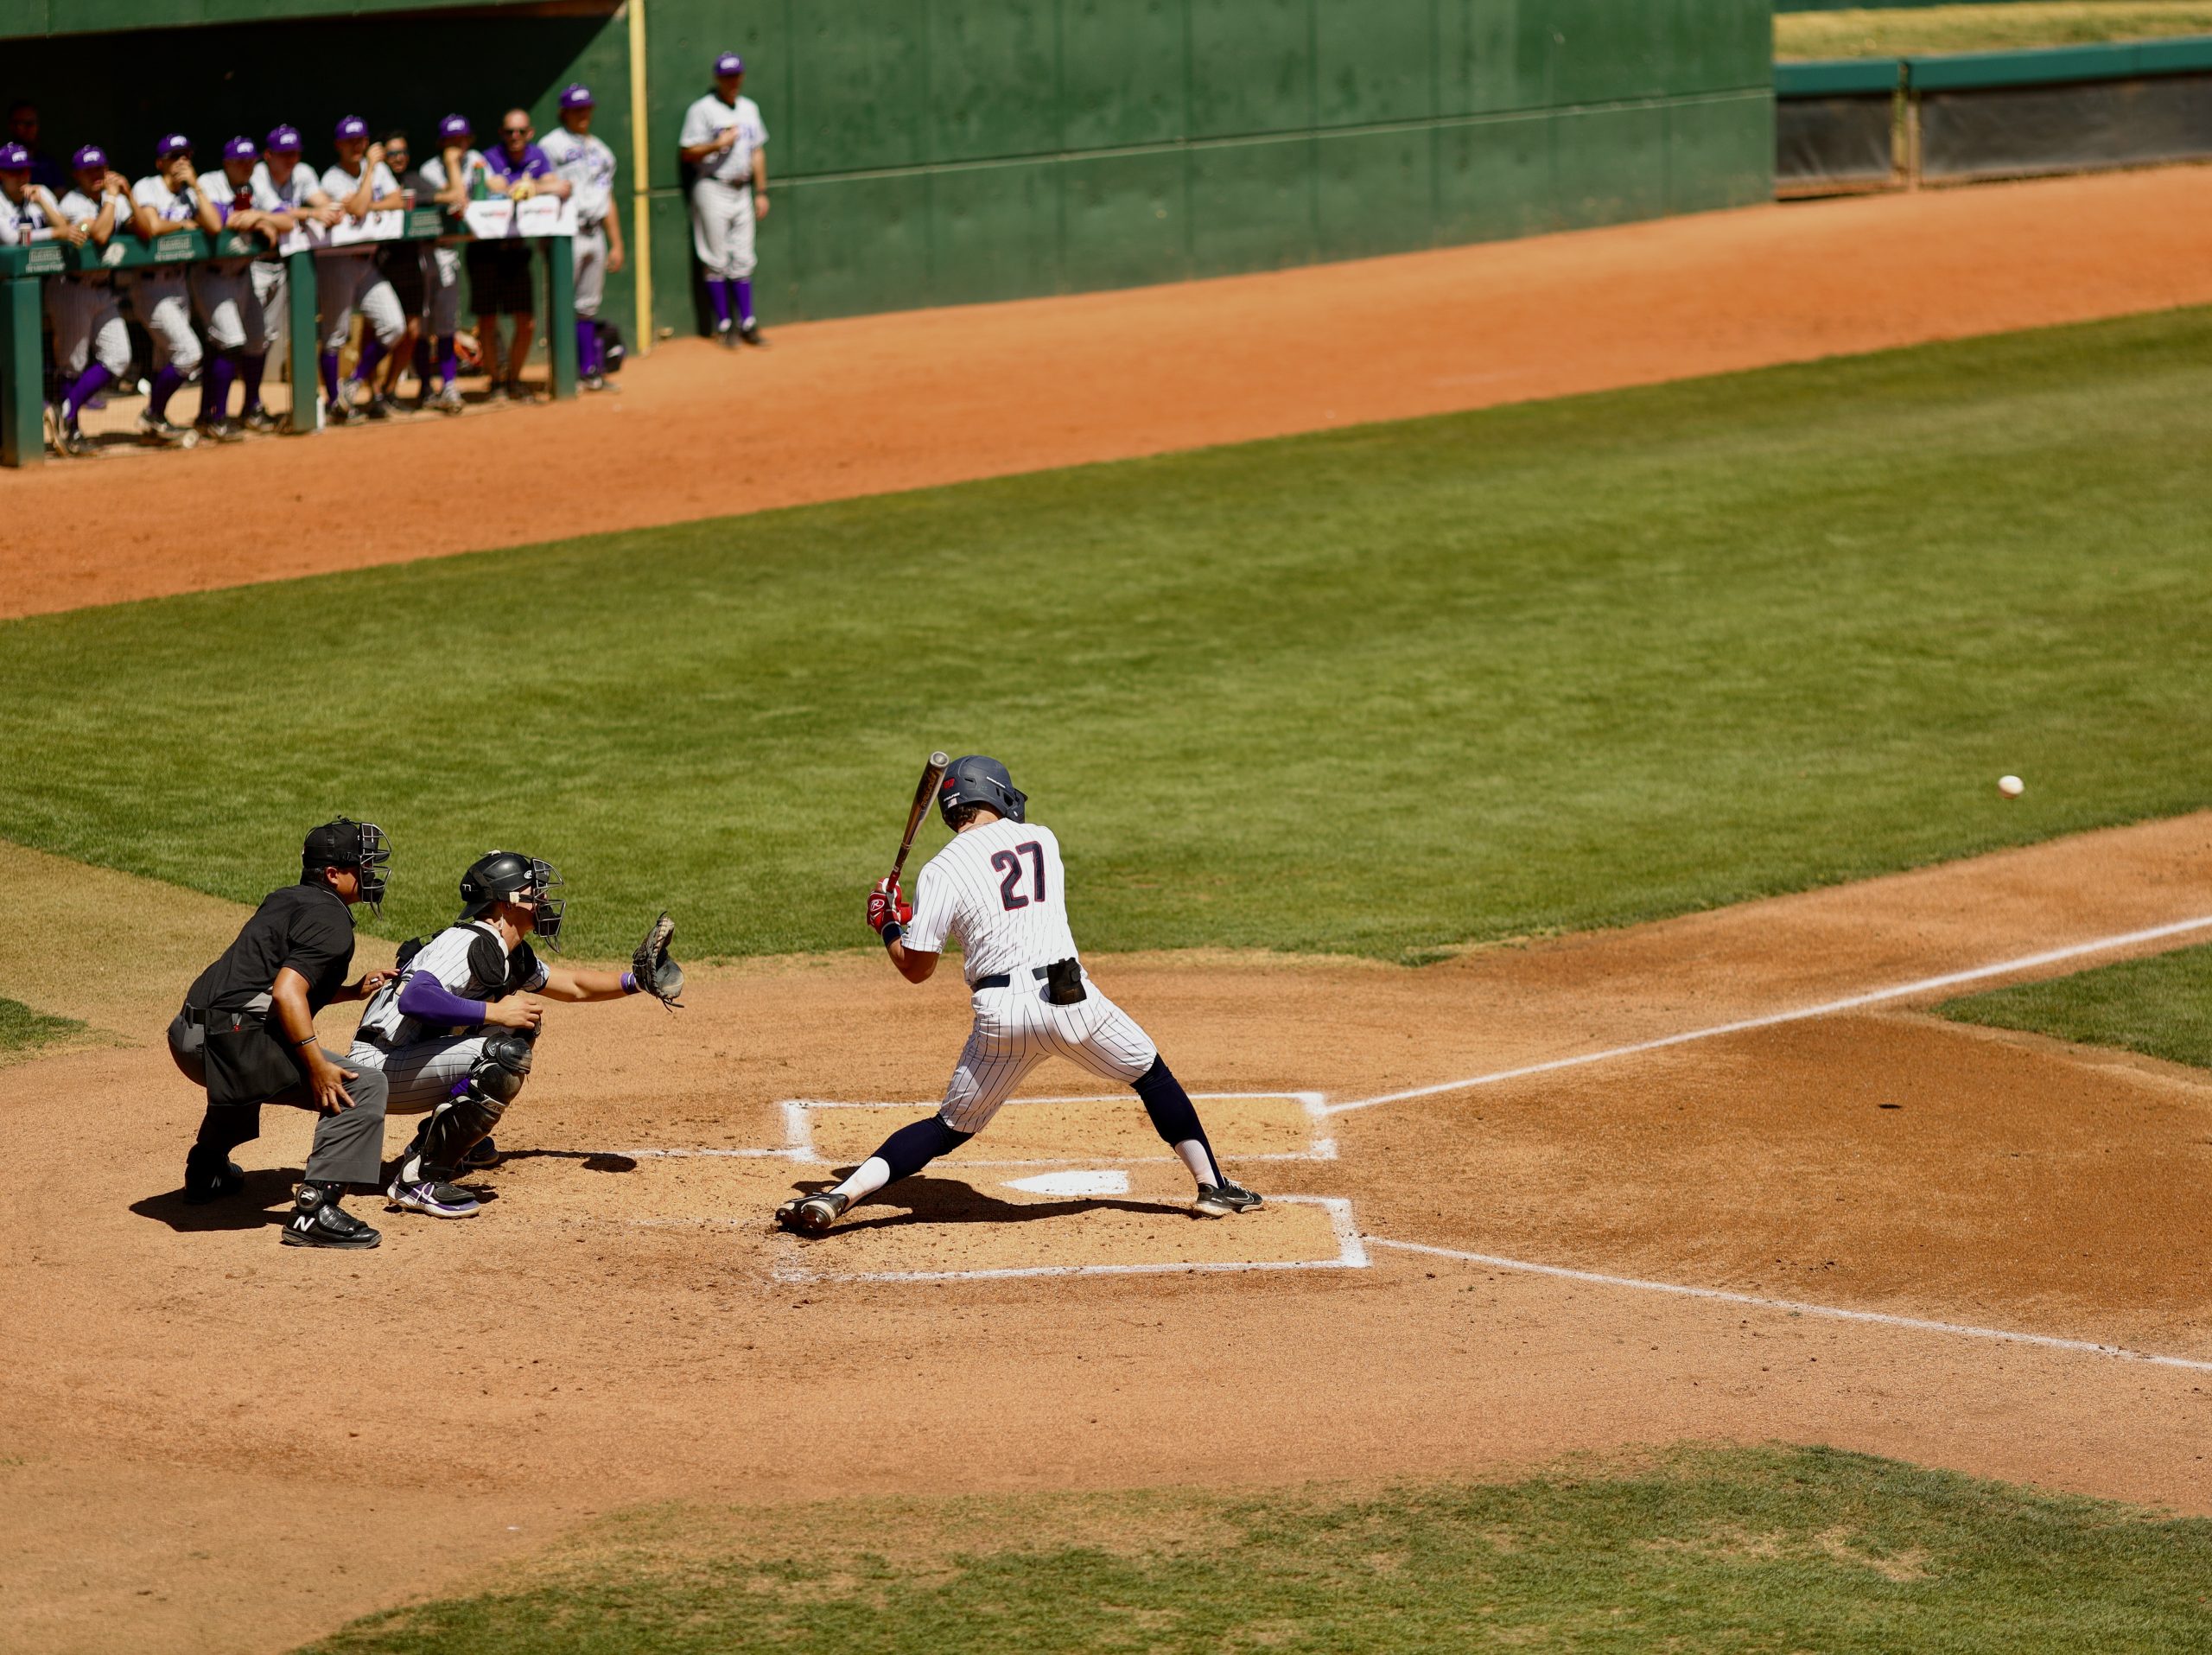 DSU leaves it all on the field, falls short in series against GCU